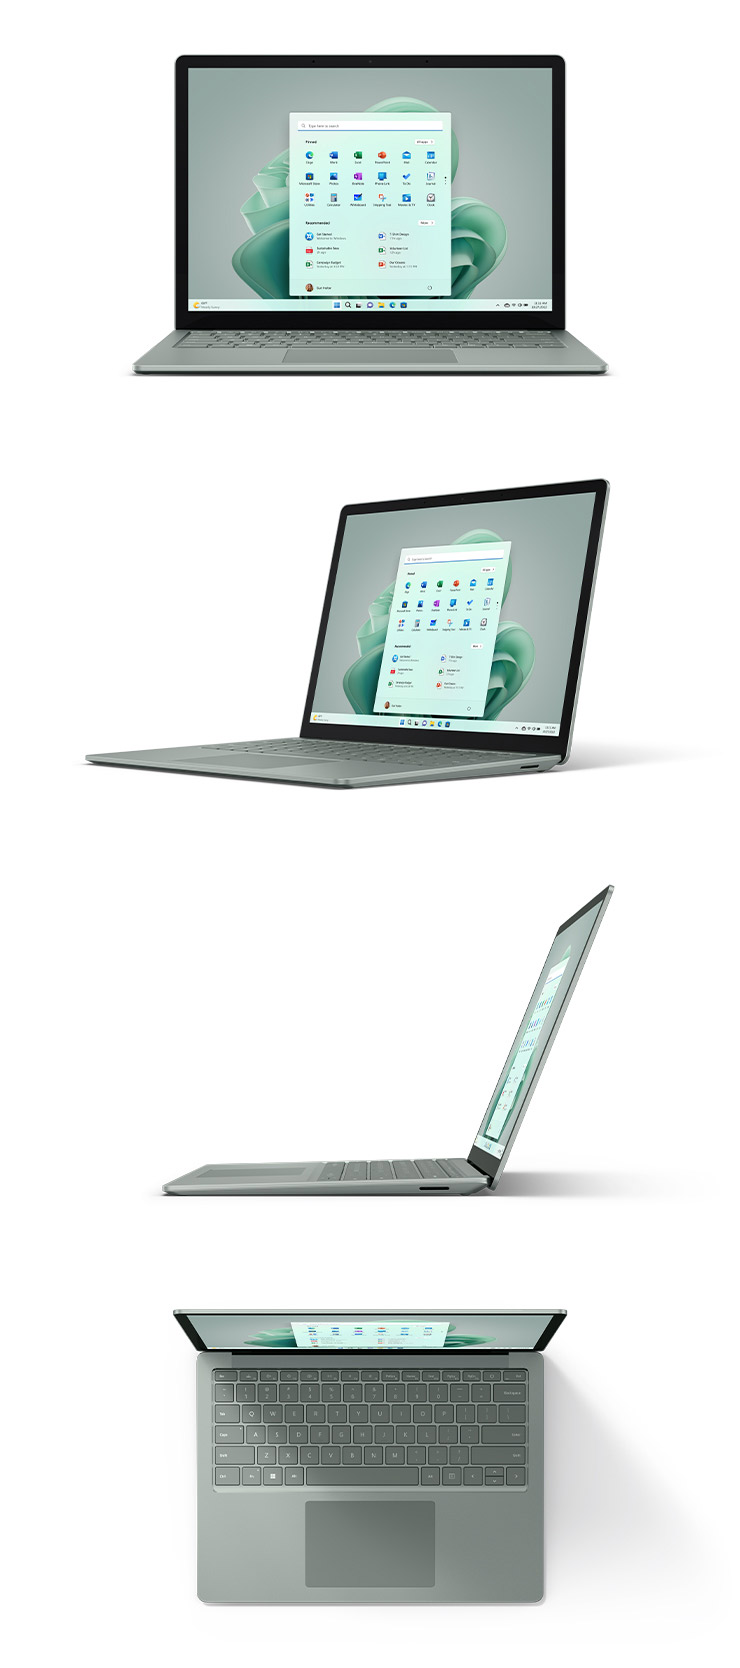 Let Us Help You Find a Surface Laptop, Computer or PC – Microsoft Surface